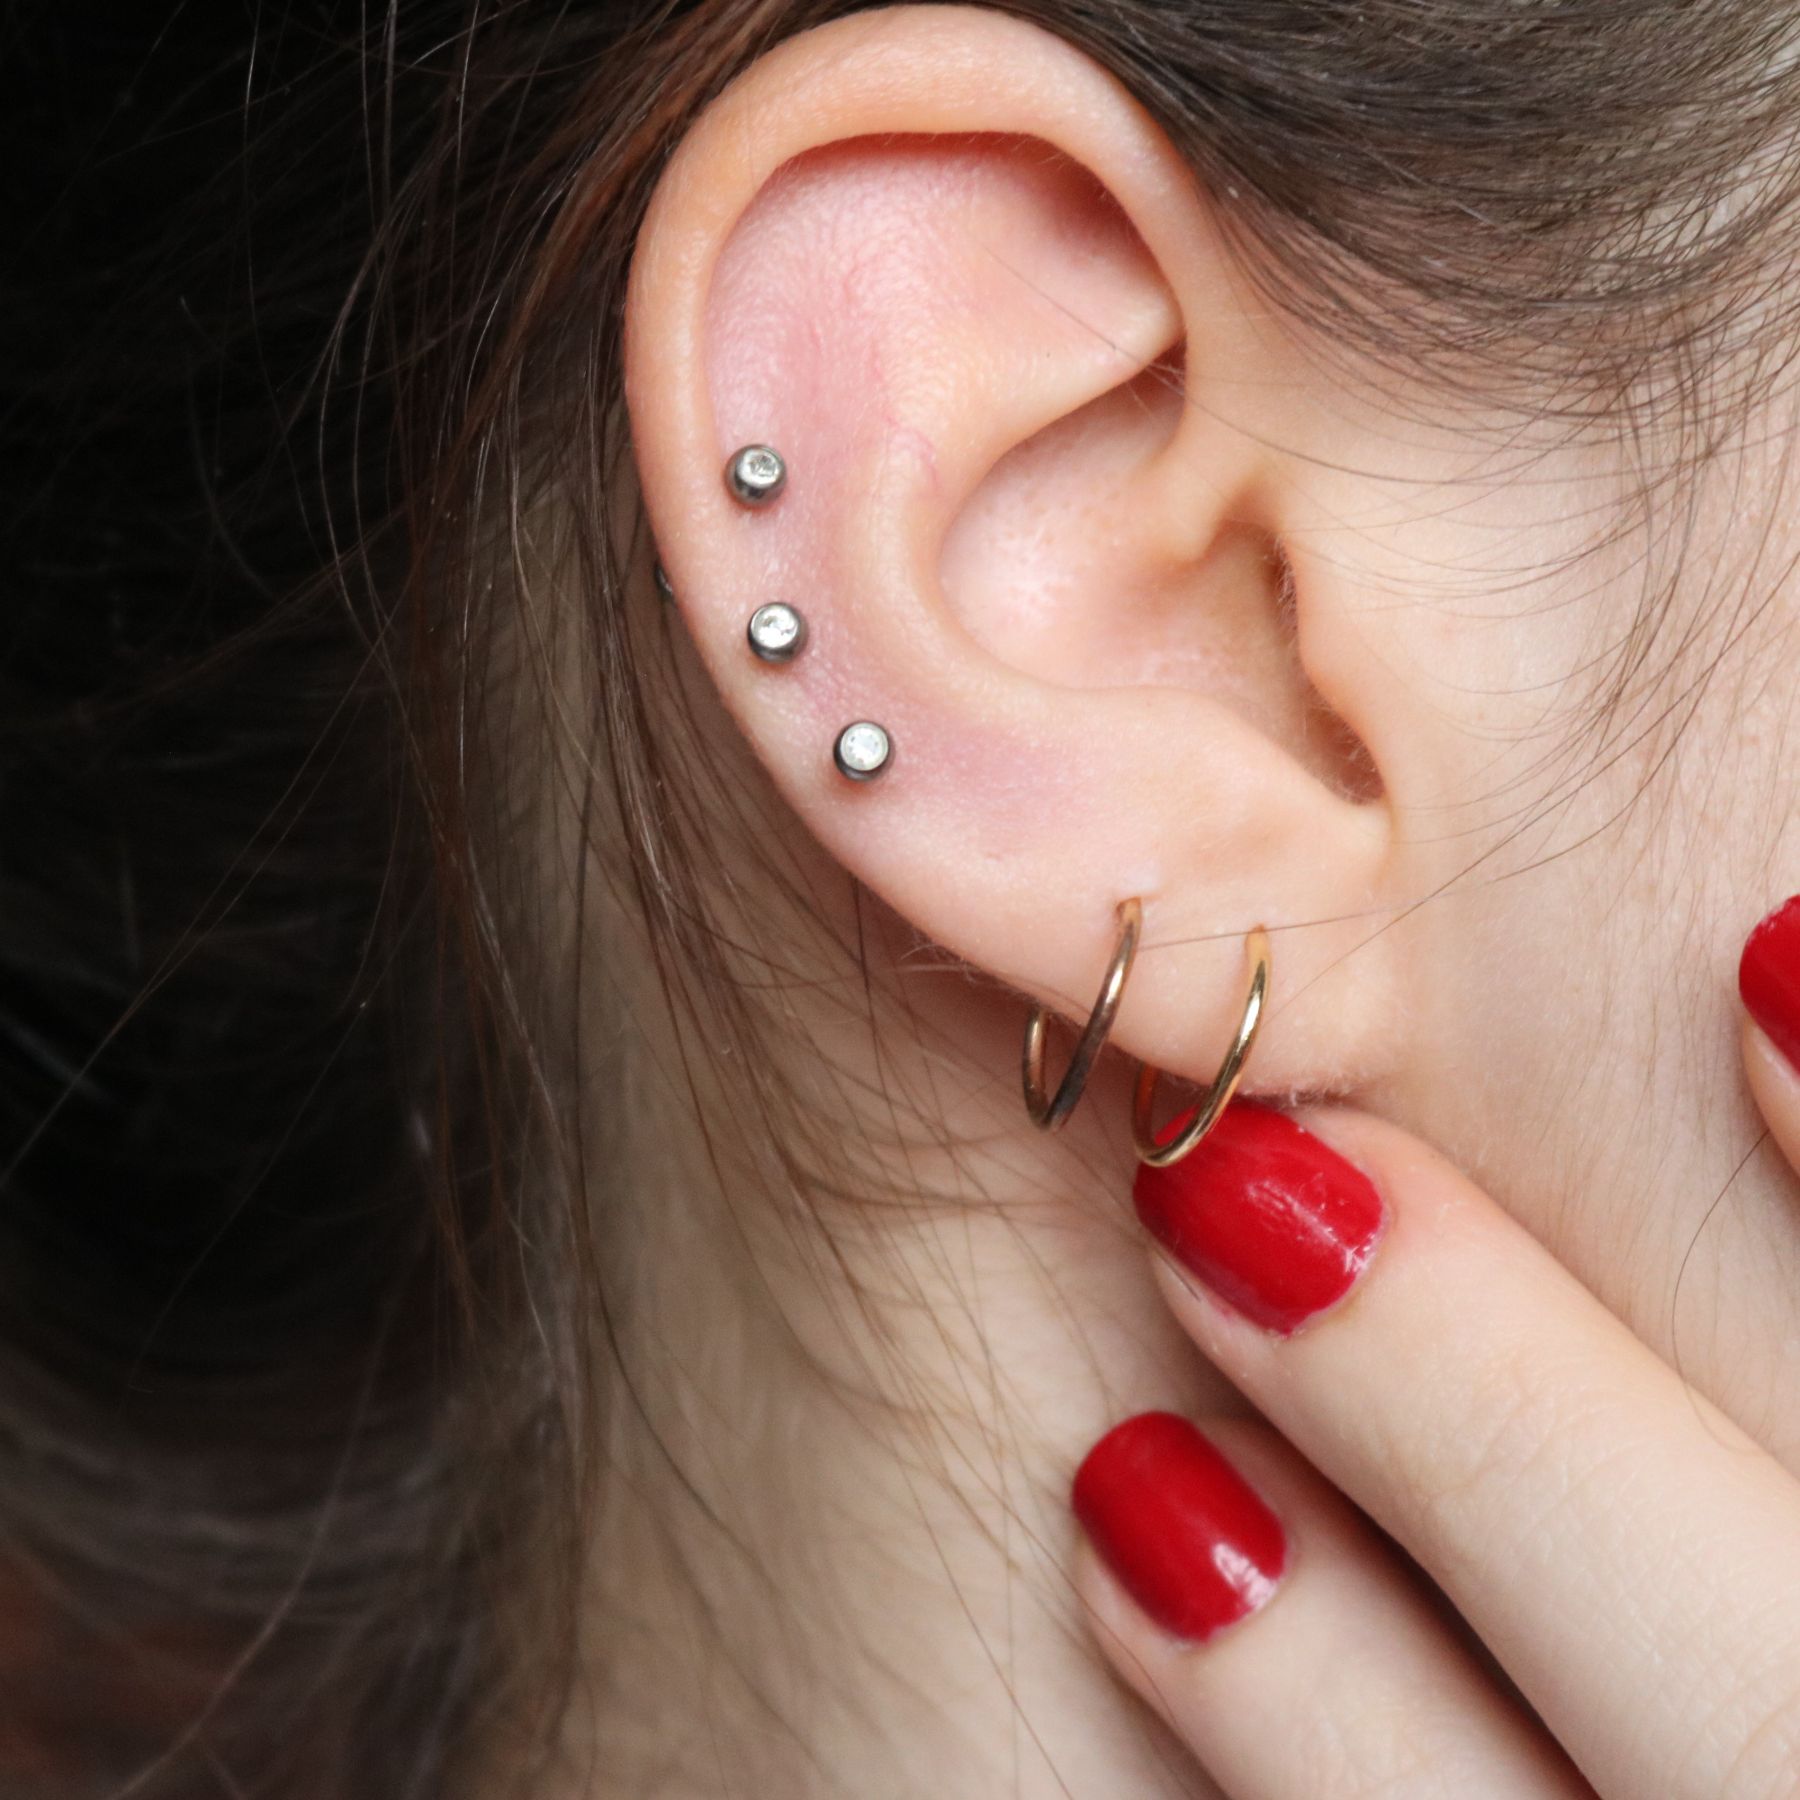 Right ear with two lobe piercings and three cartilage piercings.